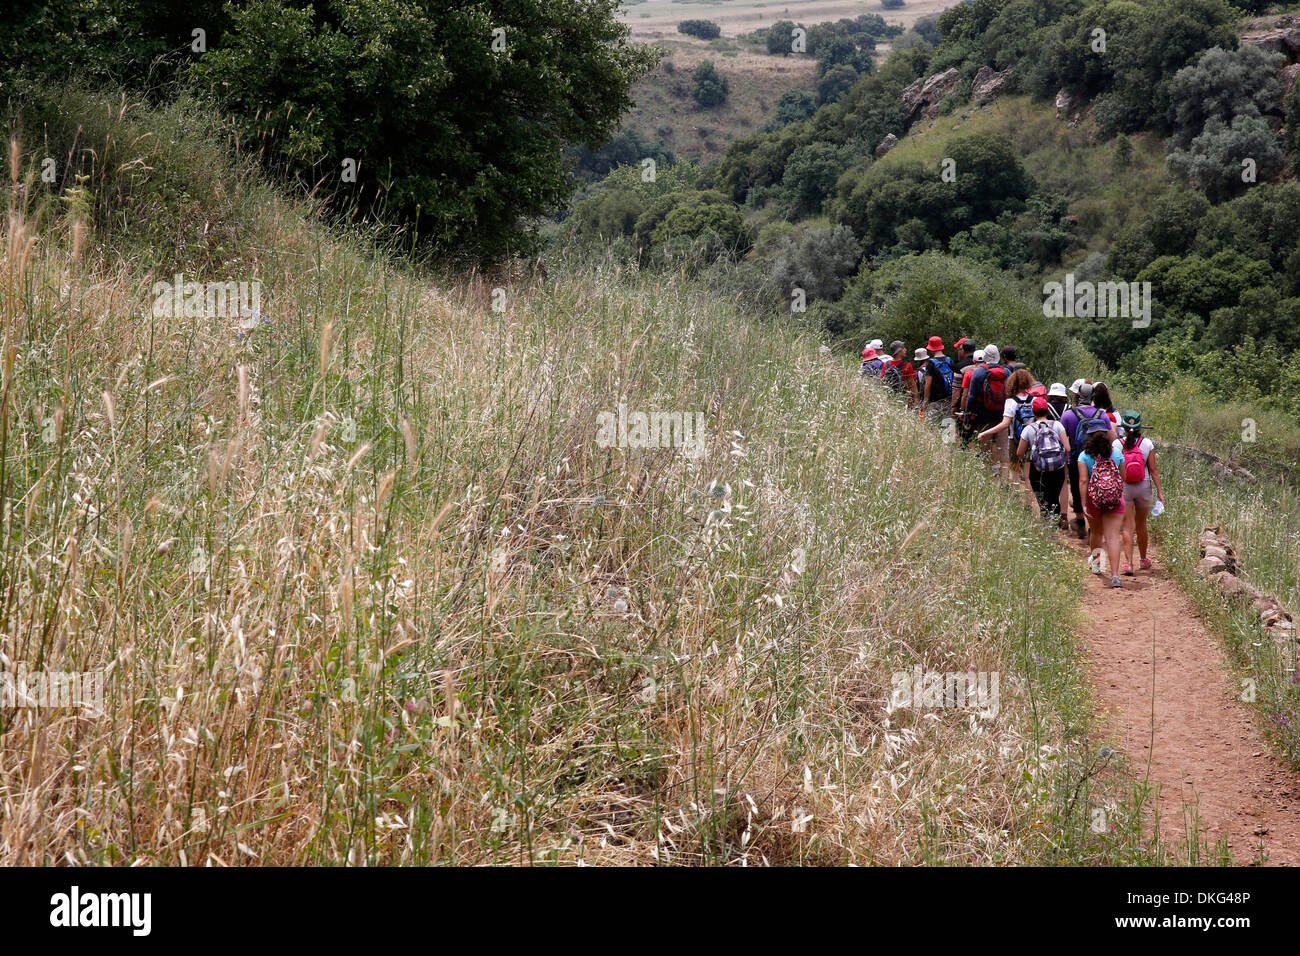 Pilgrims in the Holy Land walking in the Golan Heights, Galilee, Israel, Middle East Stock Photo